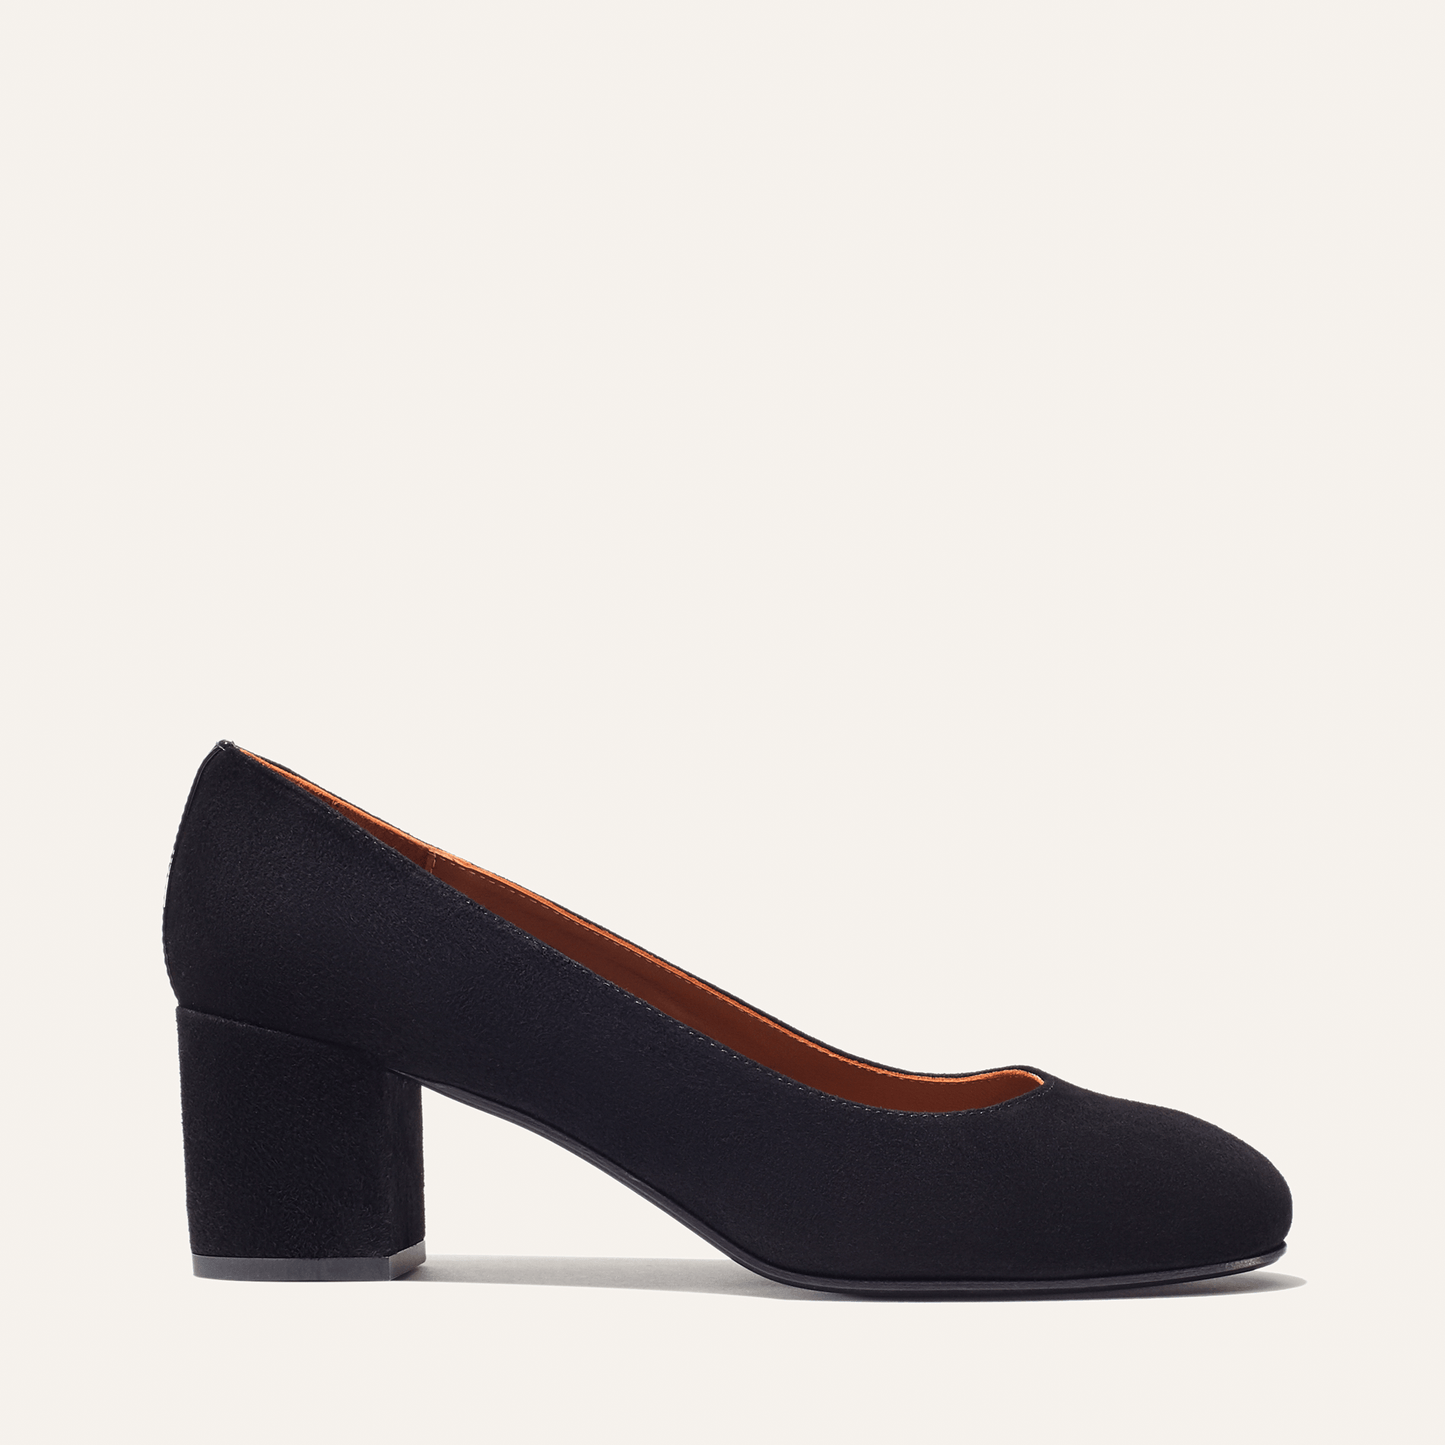 Margaux's classic and comfortable workwear Heel, made in Spain from soft, black Italian suede